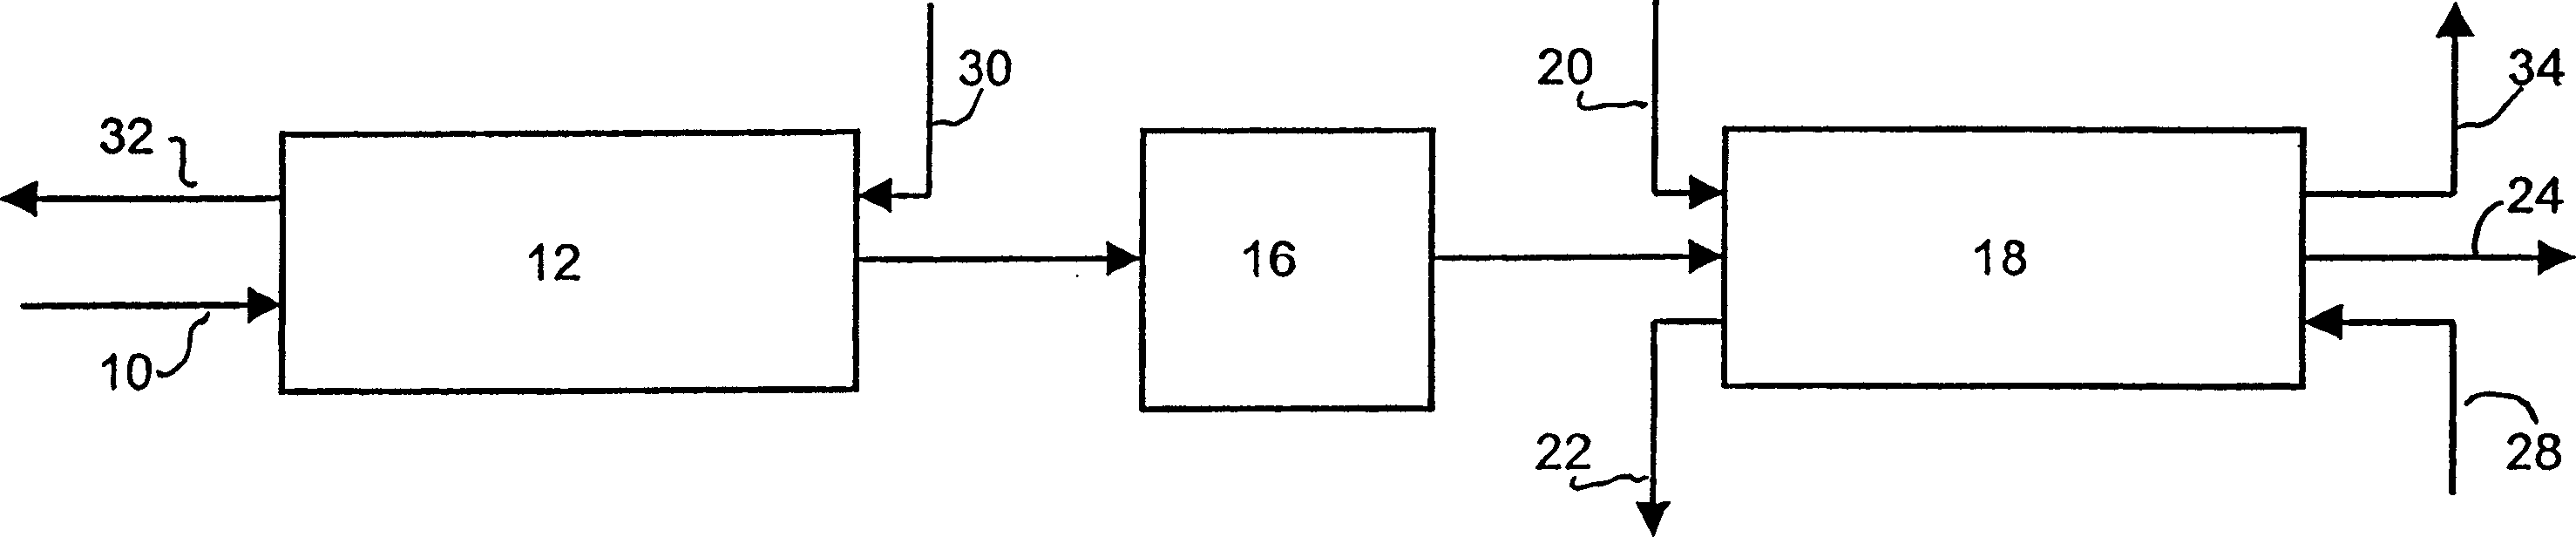 Method and adsorbent for recovering kryptsn and xenon from gas stream or liquid stream